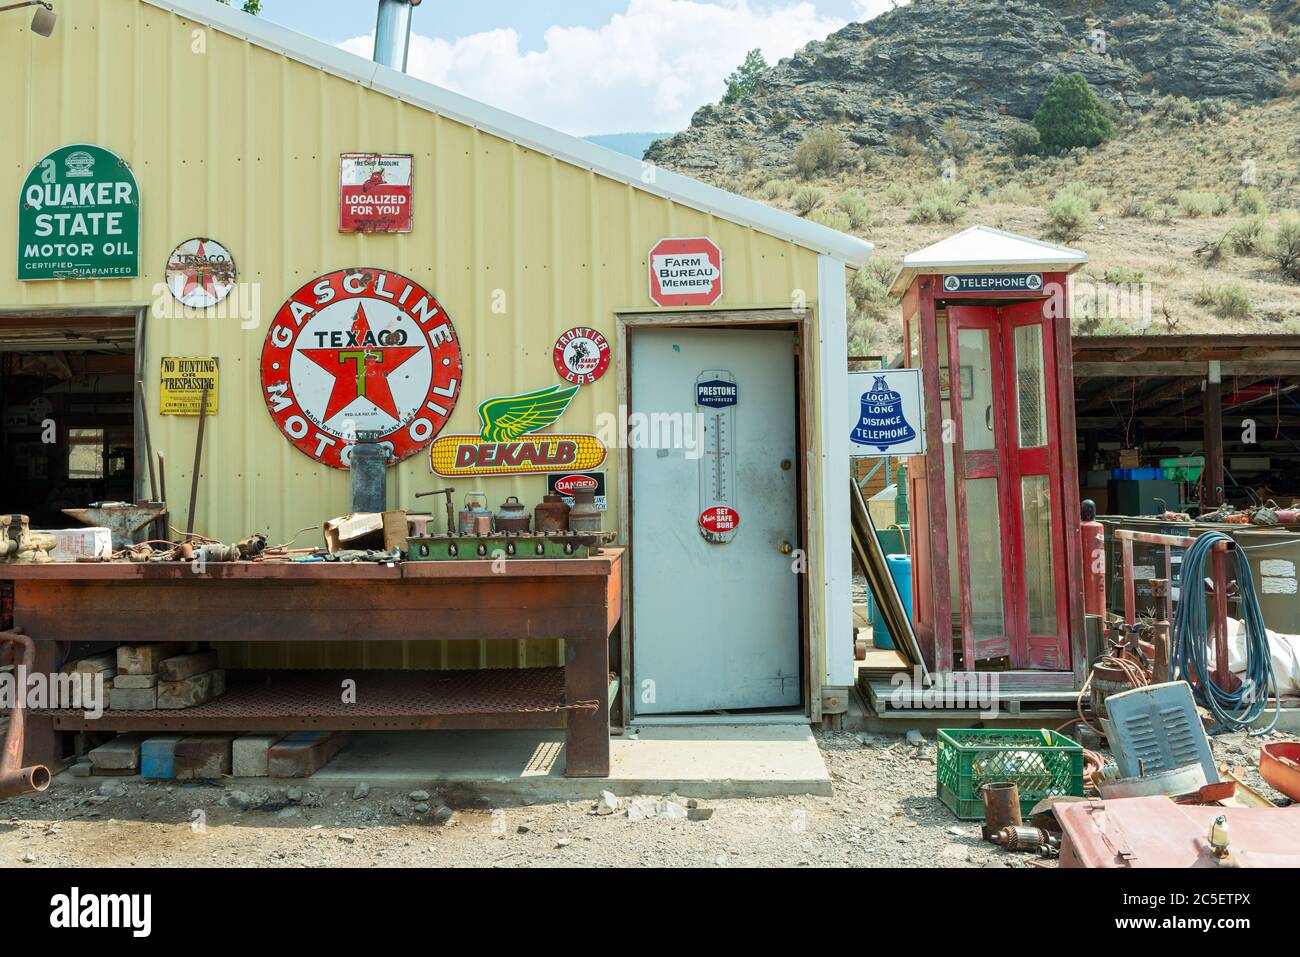 Idaho, USA - August 22, 2013: Outside of an old service station with an antique phone booth Stock Photo